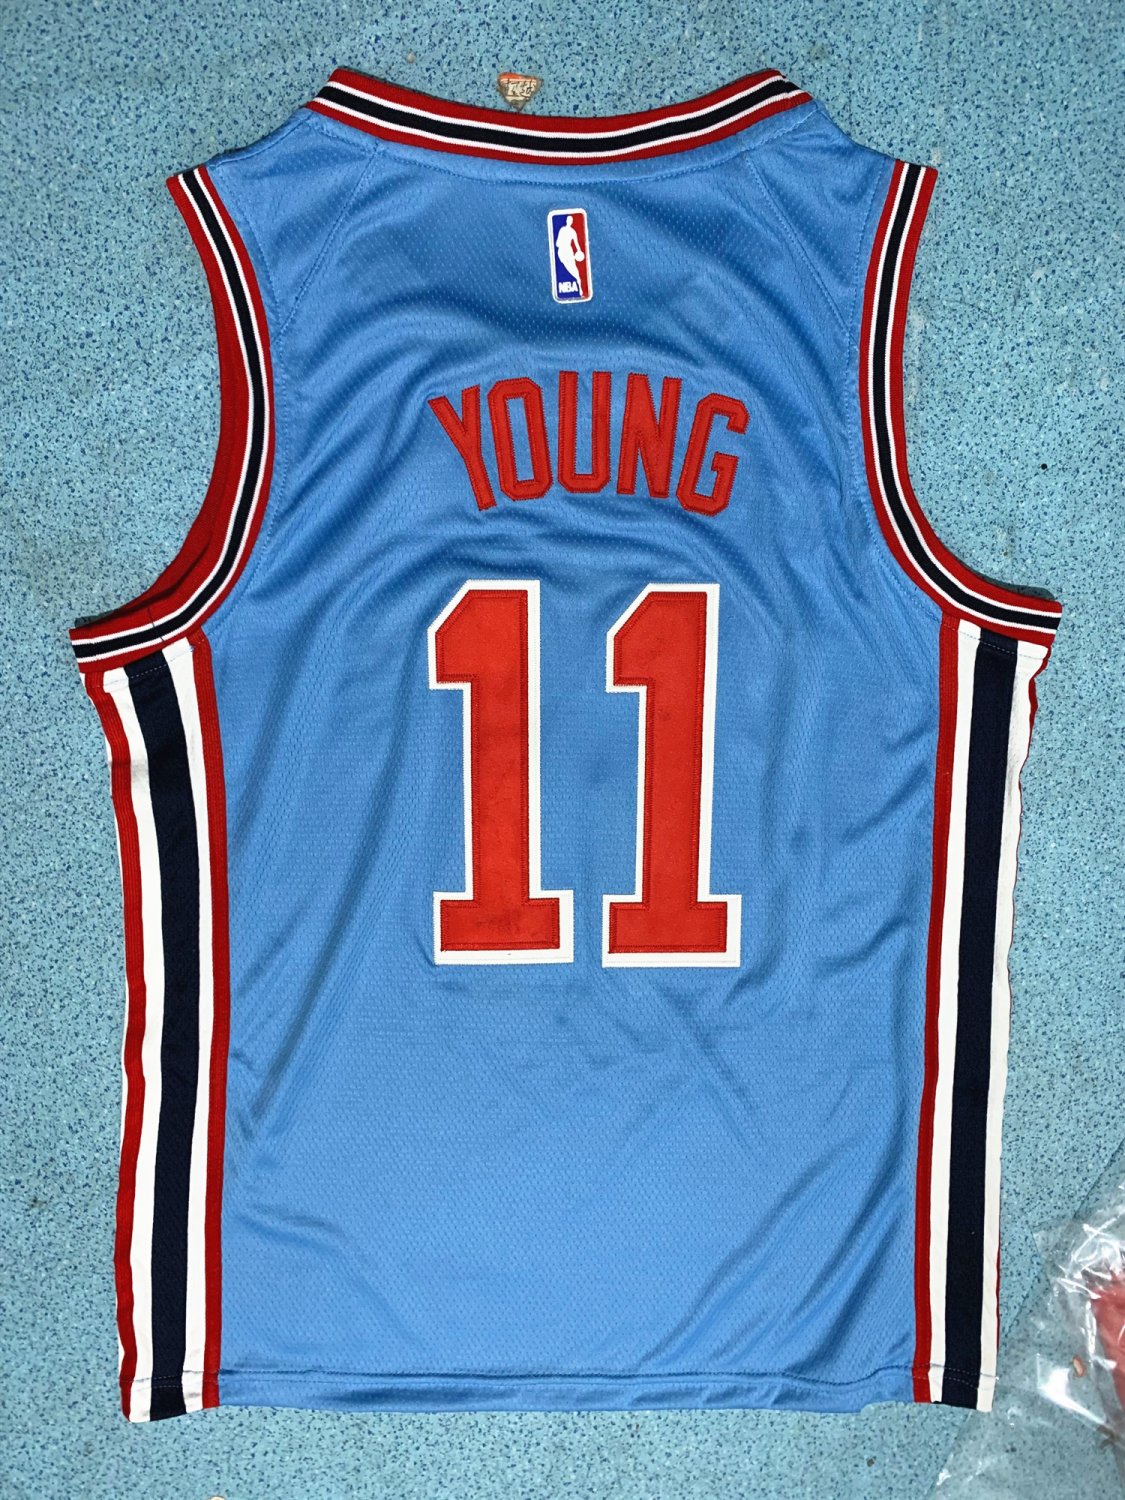 trae young light blue jersey